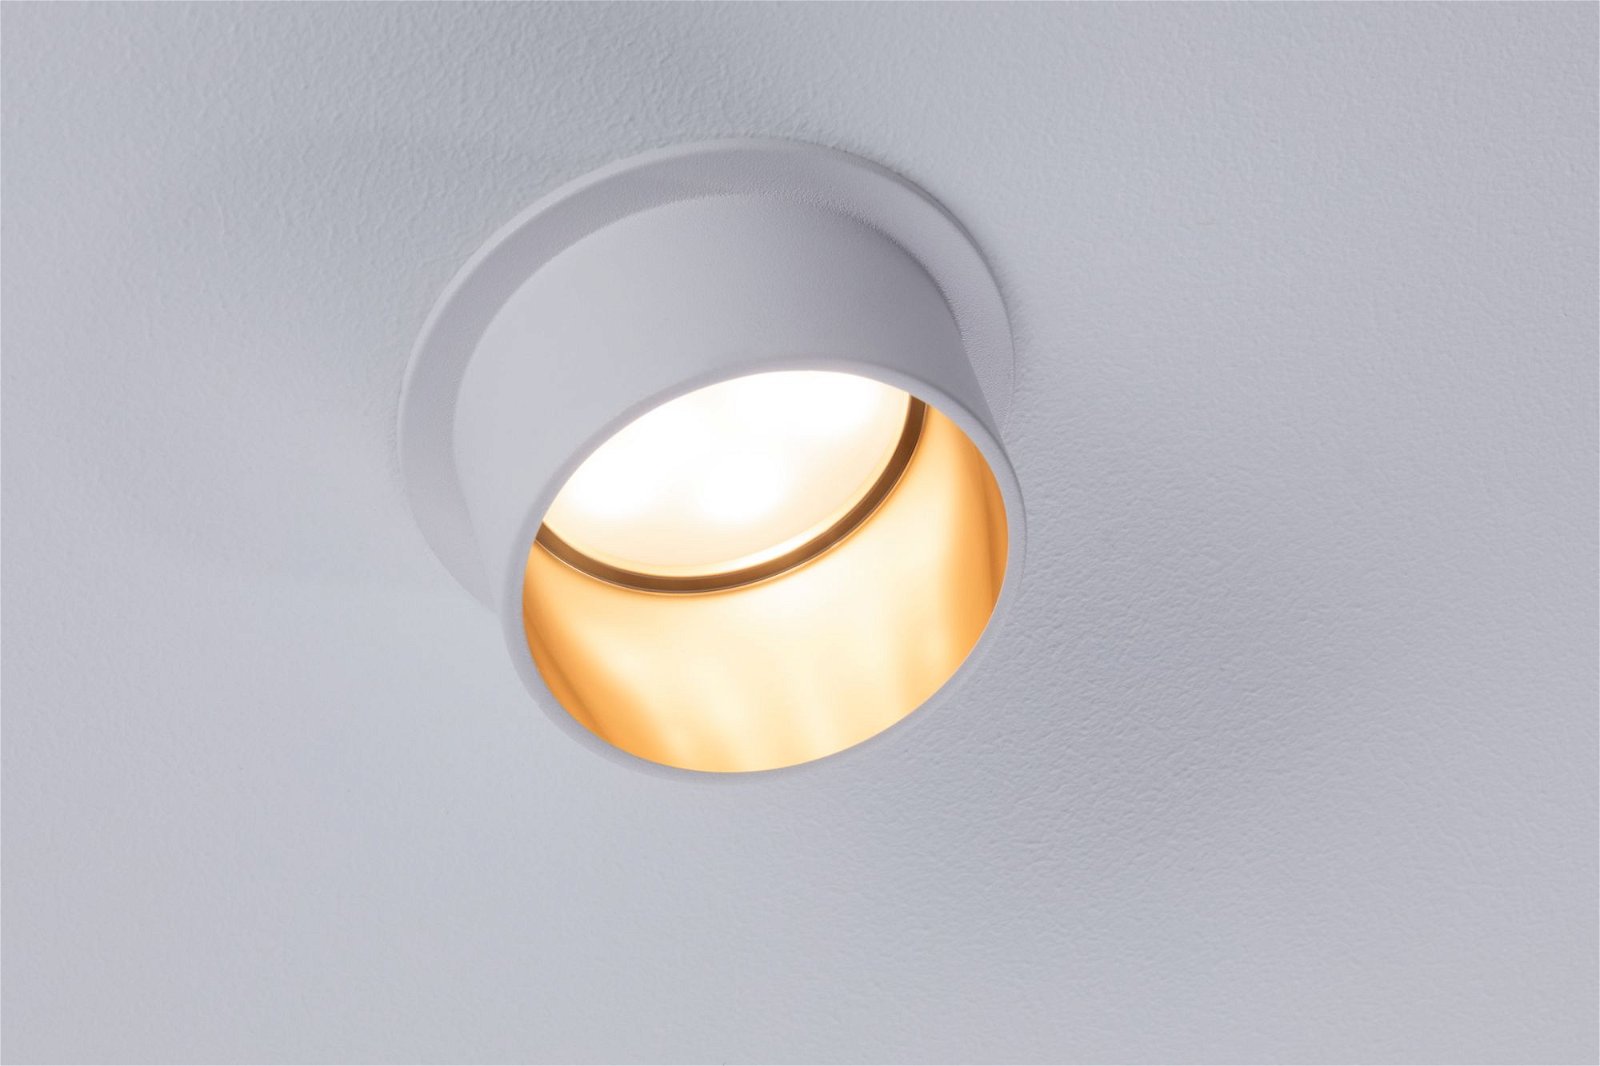 LED Recessed luminaire 3-Step-Dim Gil Coin IP44 round 68mm Coin 6W 470lm 230V dimmable 2700K Matt white/Gold